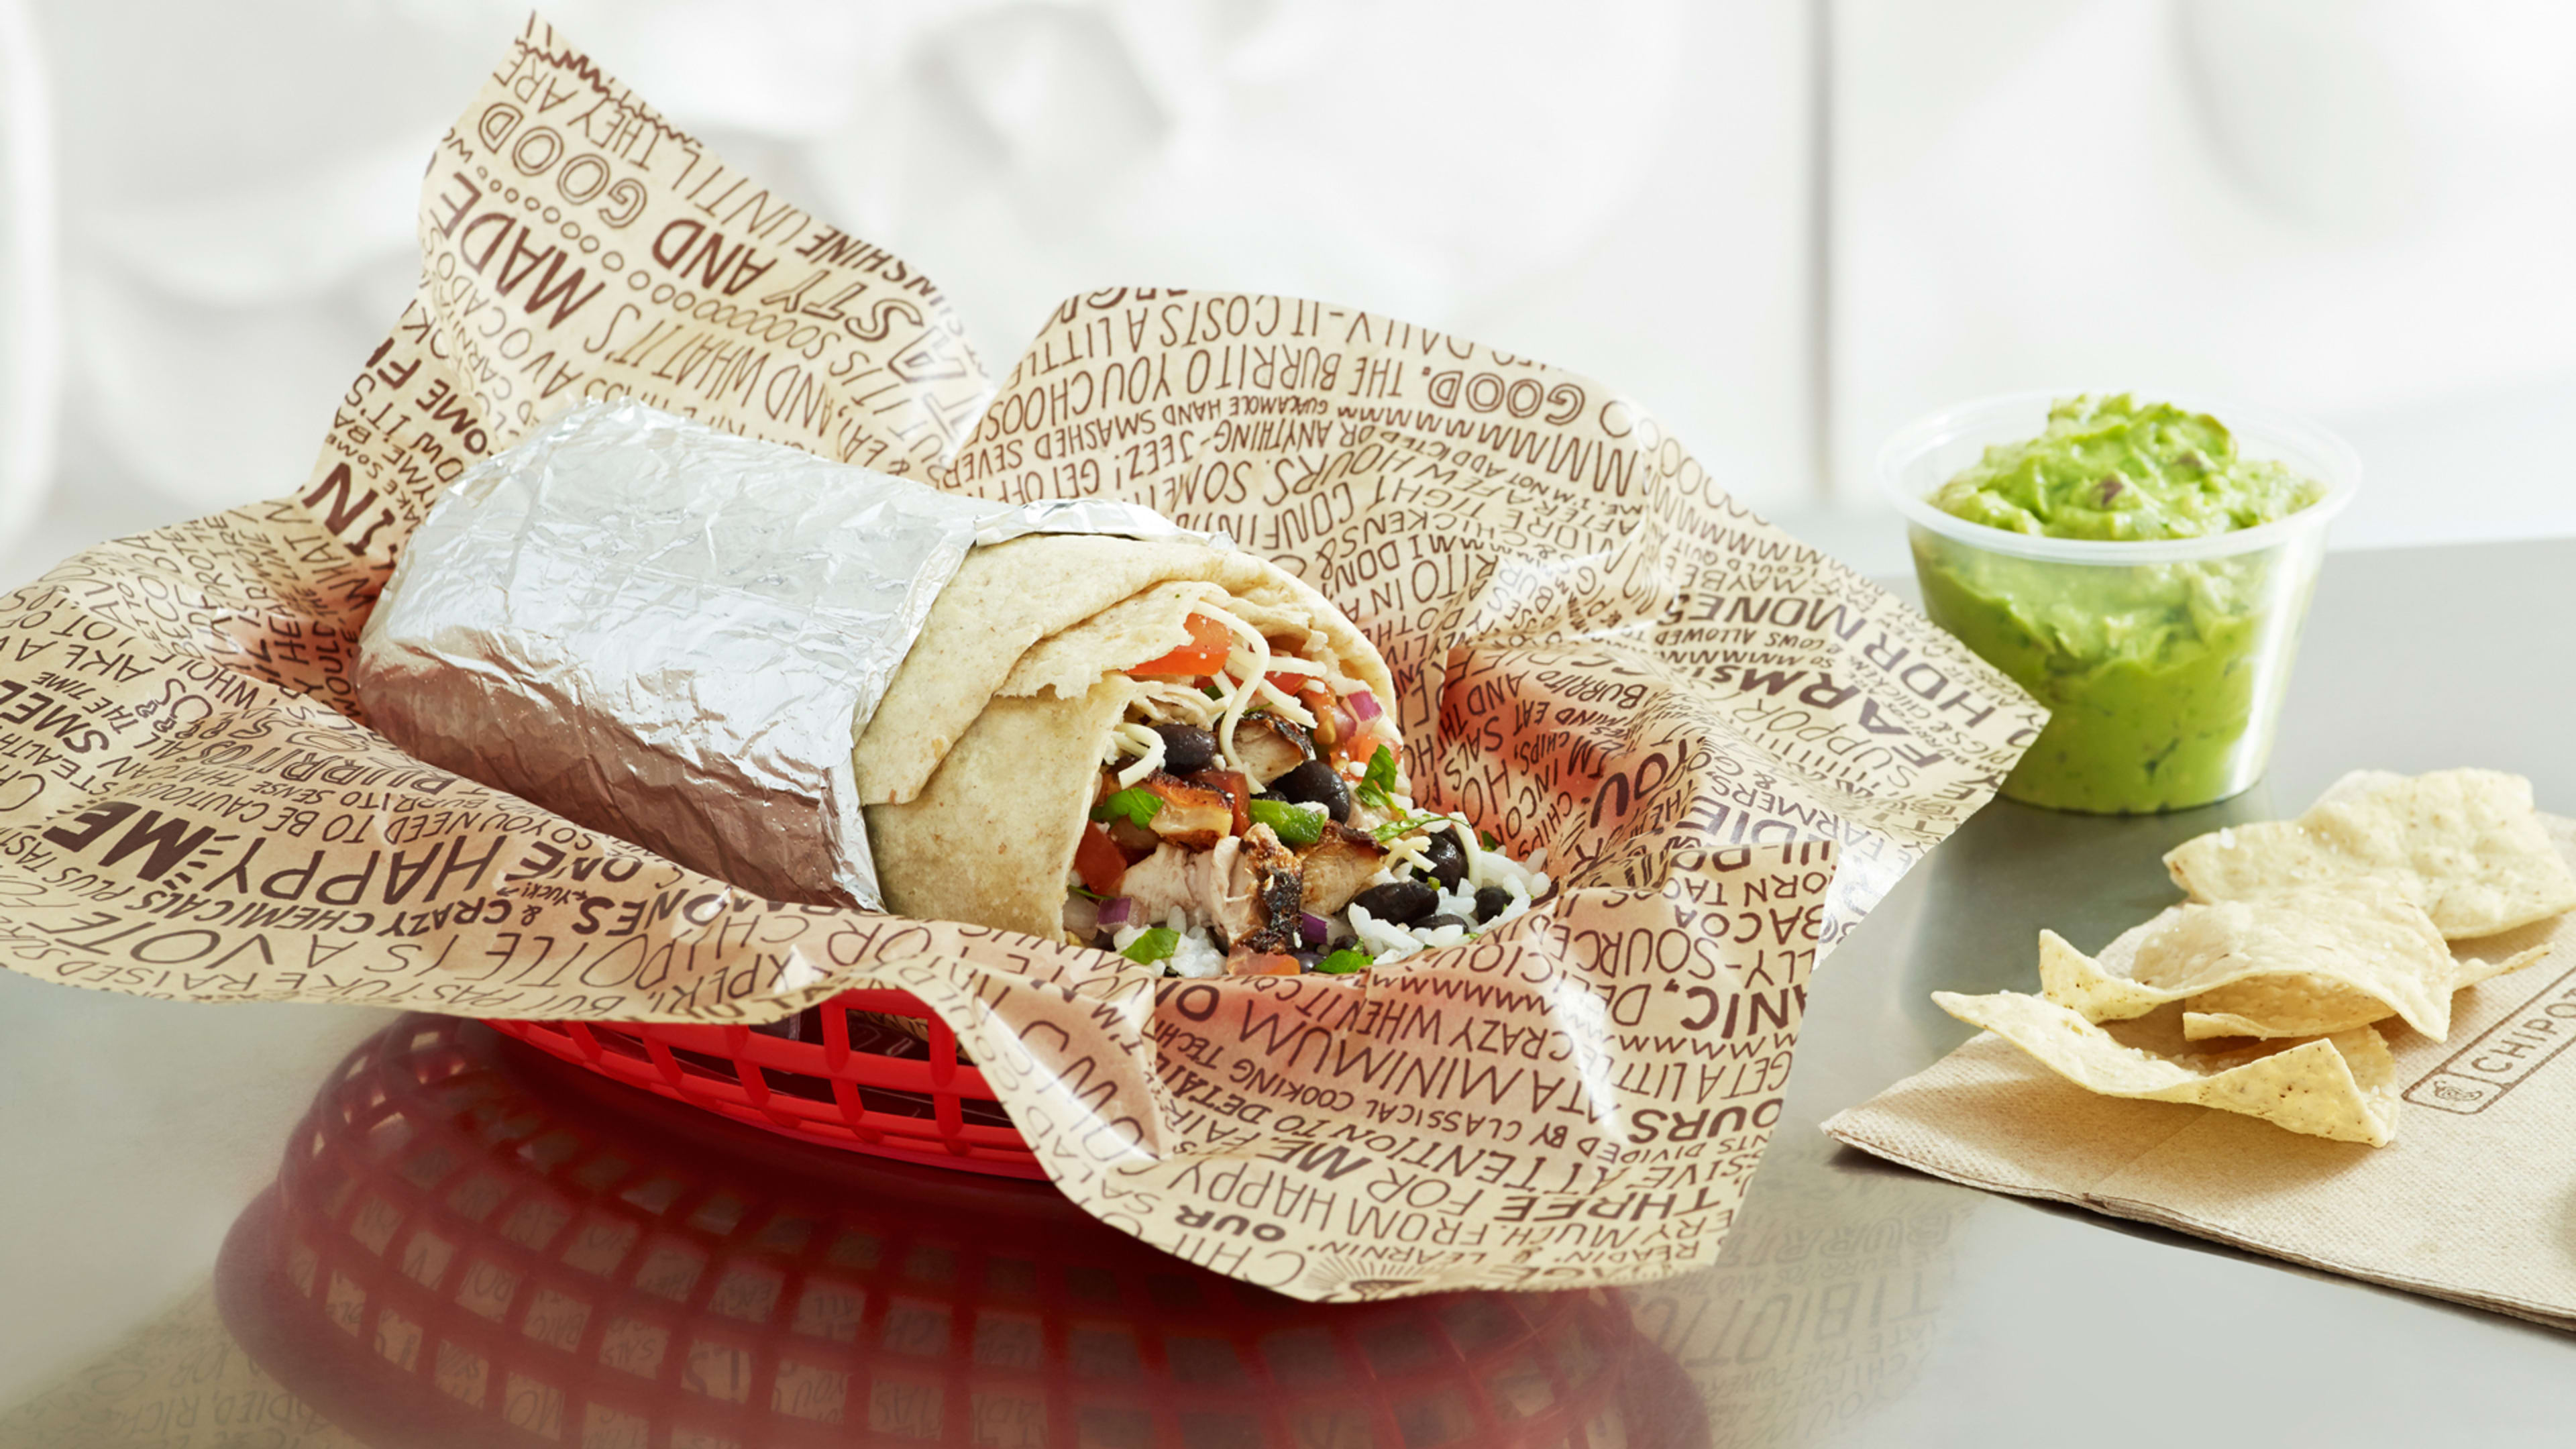 Postmates is delivering Chipotle for free this week